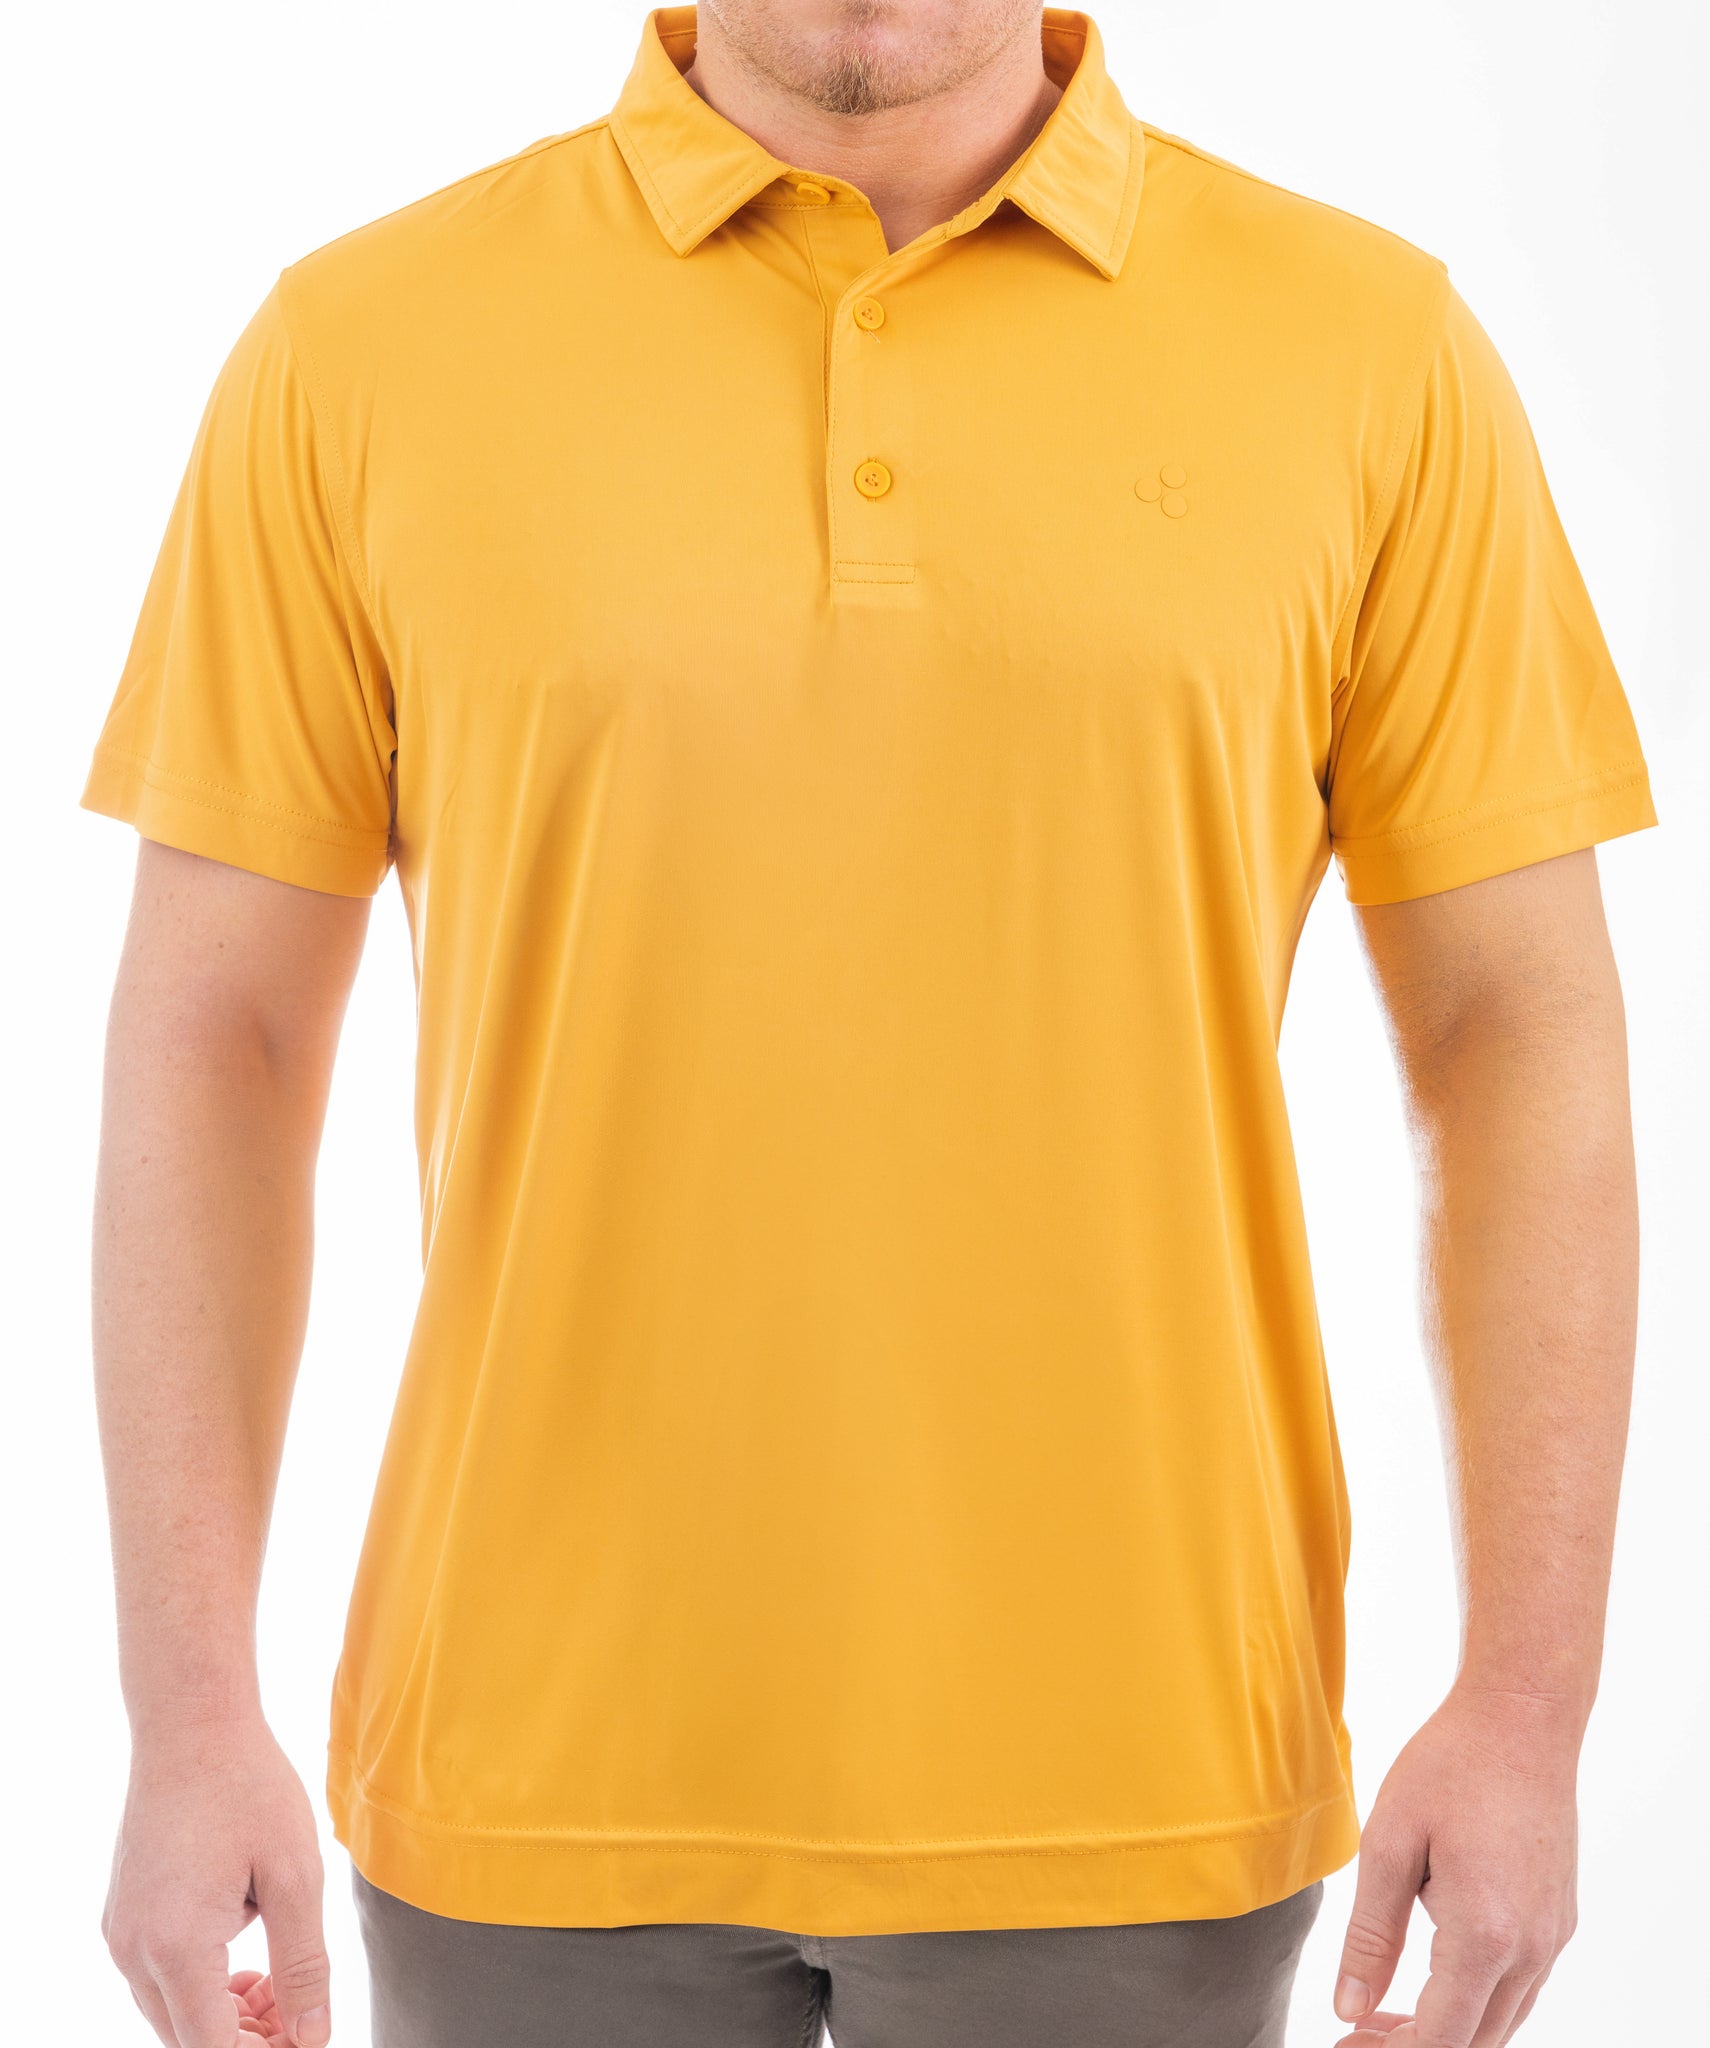 This golf polo has a golden-yellow color to it. It’s got 4-way stretch, it’s breathable, uv protected and an athletic fit.